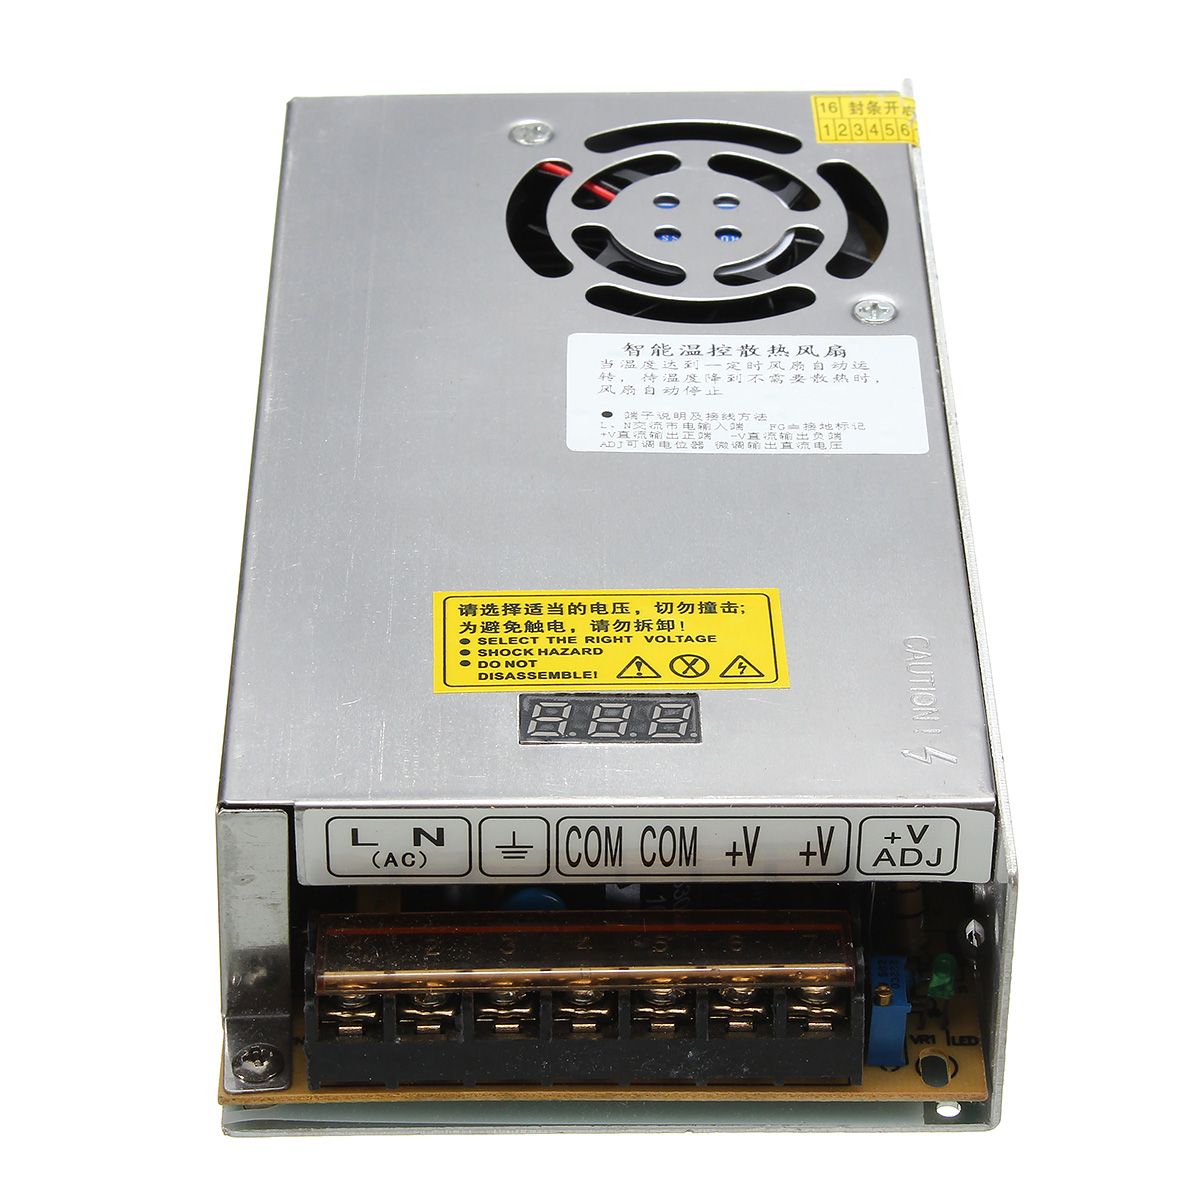 Switching-Power-Supply-Transformer-Adjustable-AC-220V-to-DC-0-5V-40A-240W-with-LCD-Display-1424723